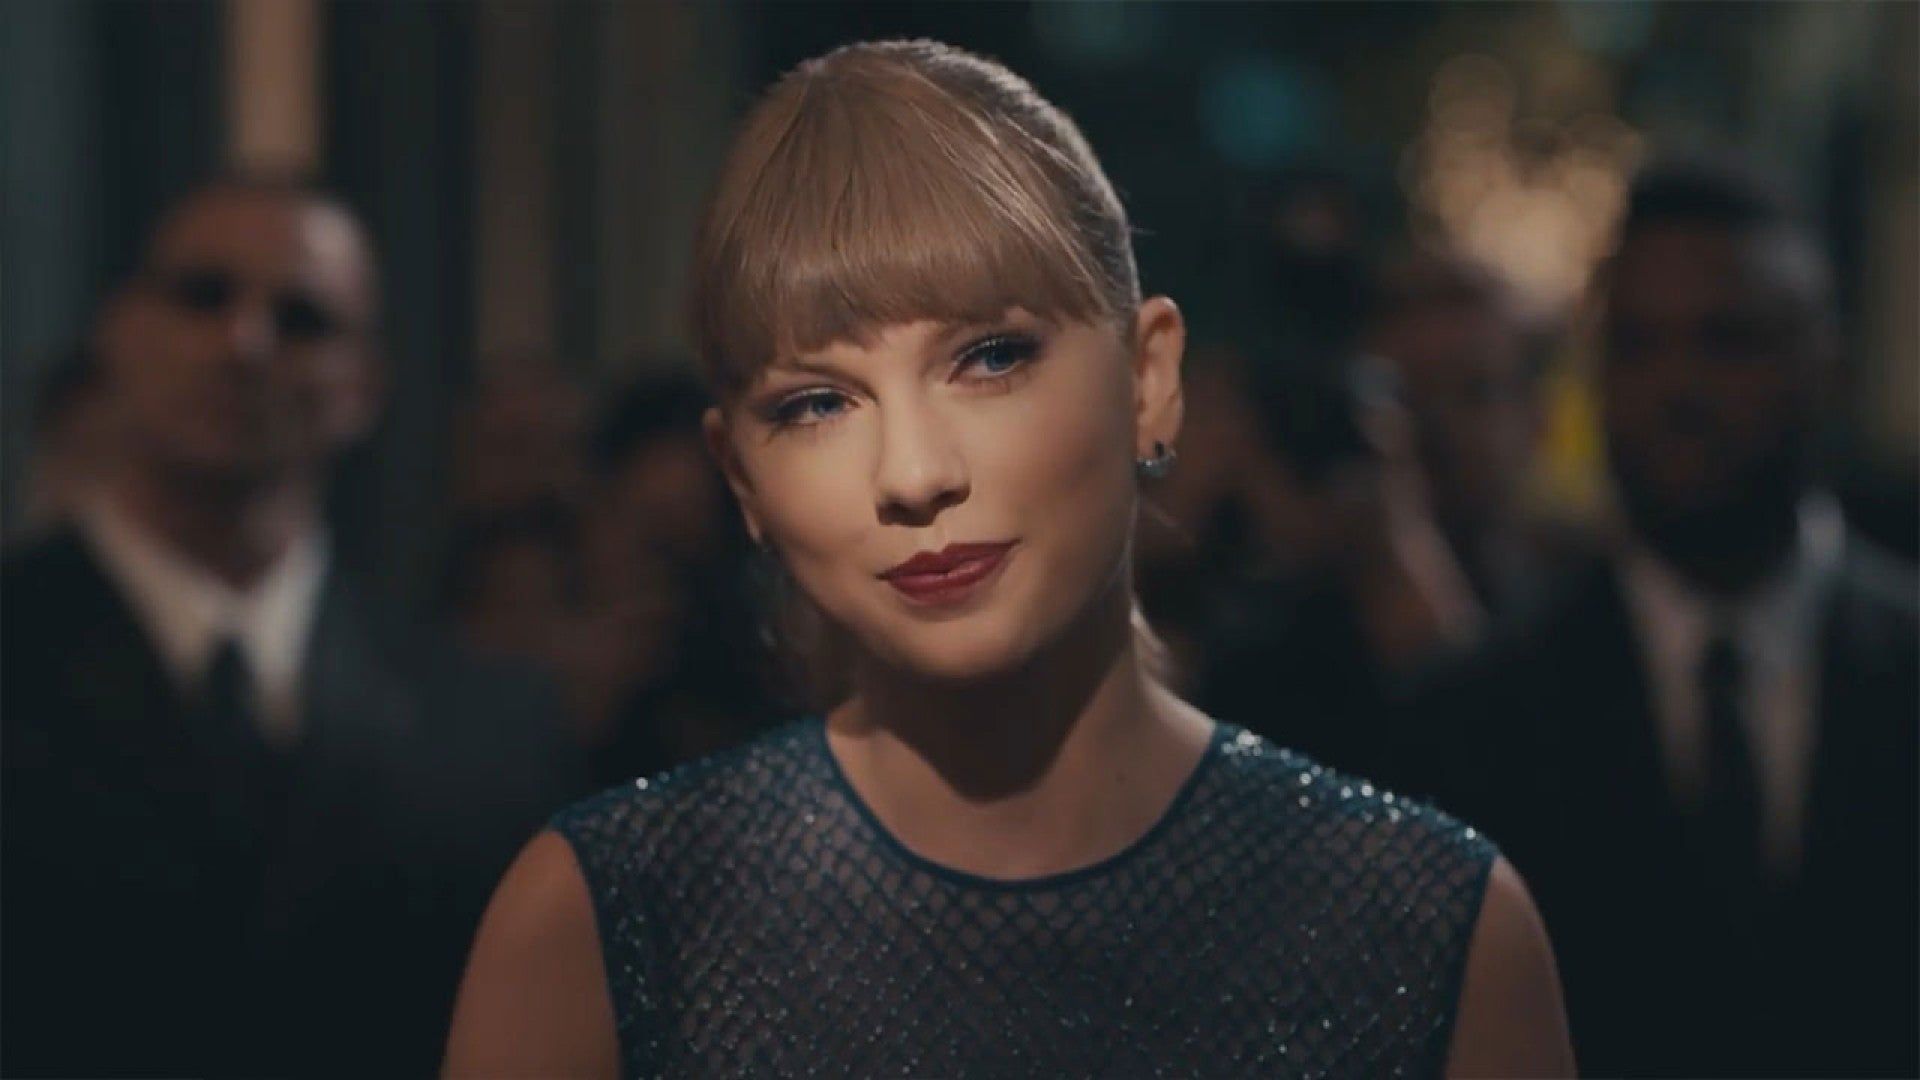 Taylor Swift Releases Second 'Delicate' Music Video - Watch!